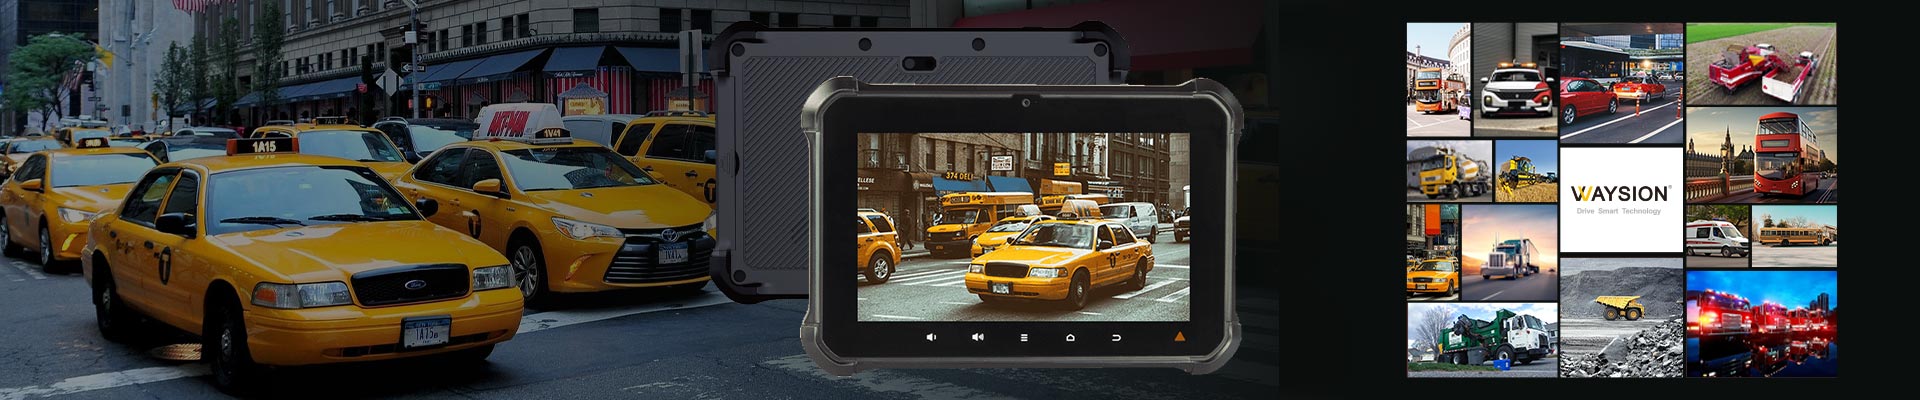 USA rugged driver tablet manufacturers